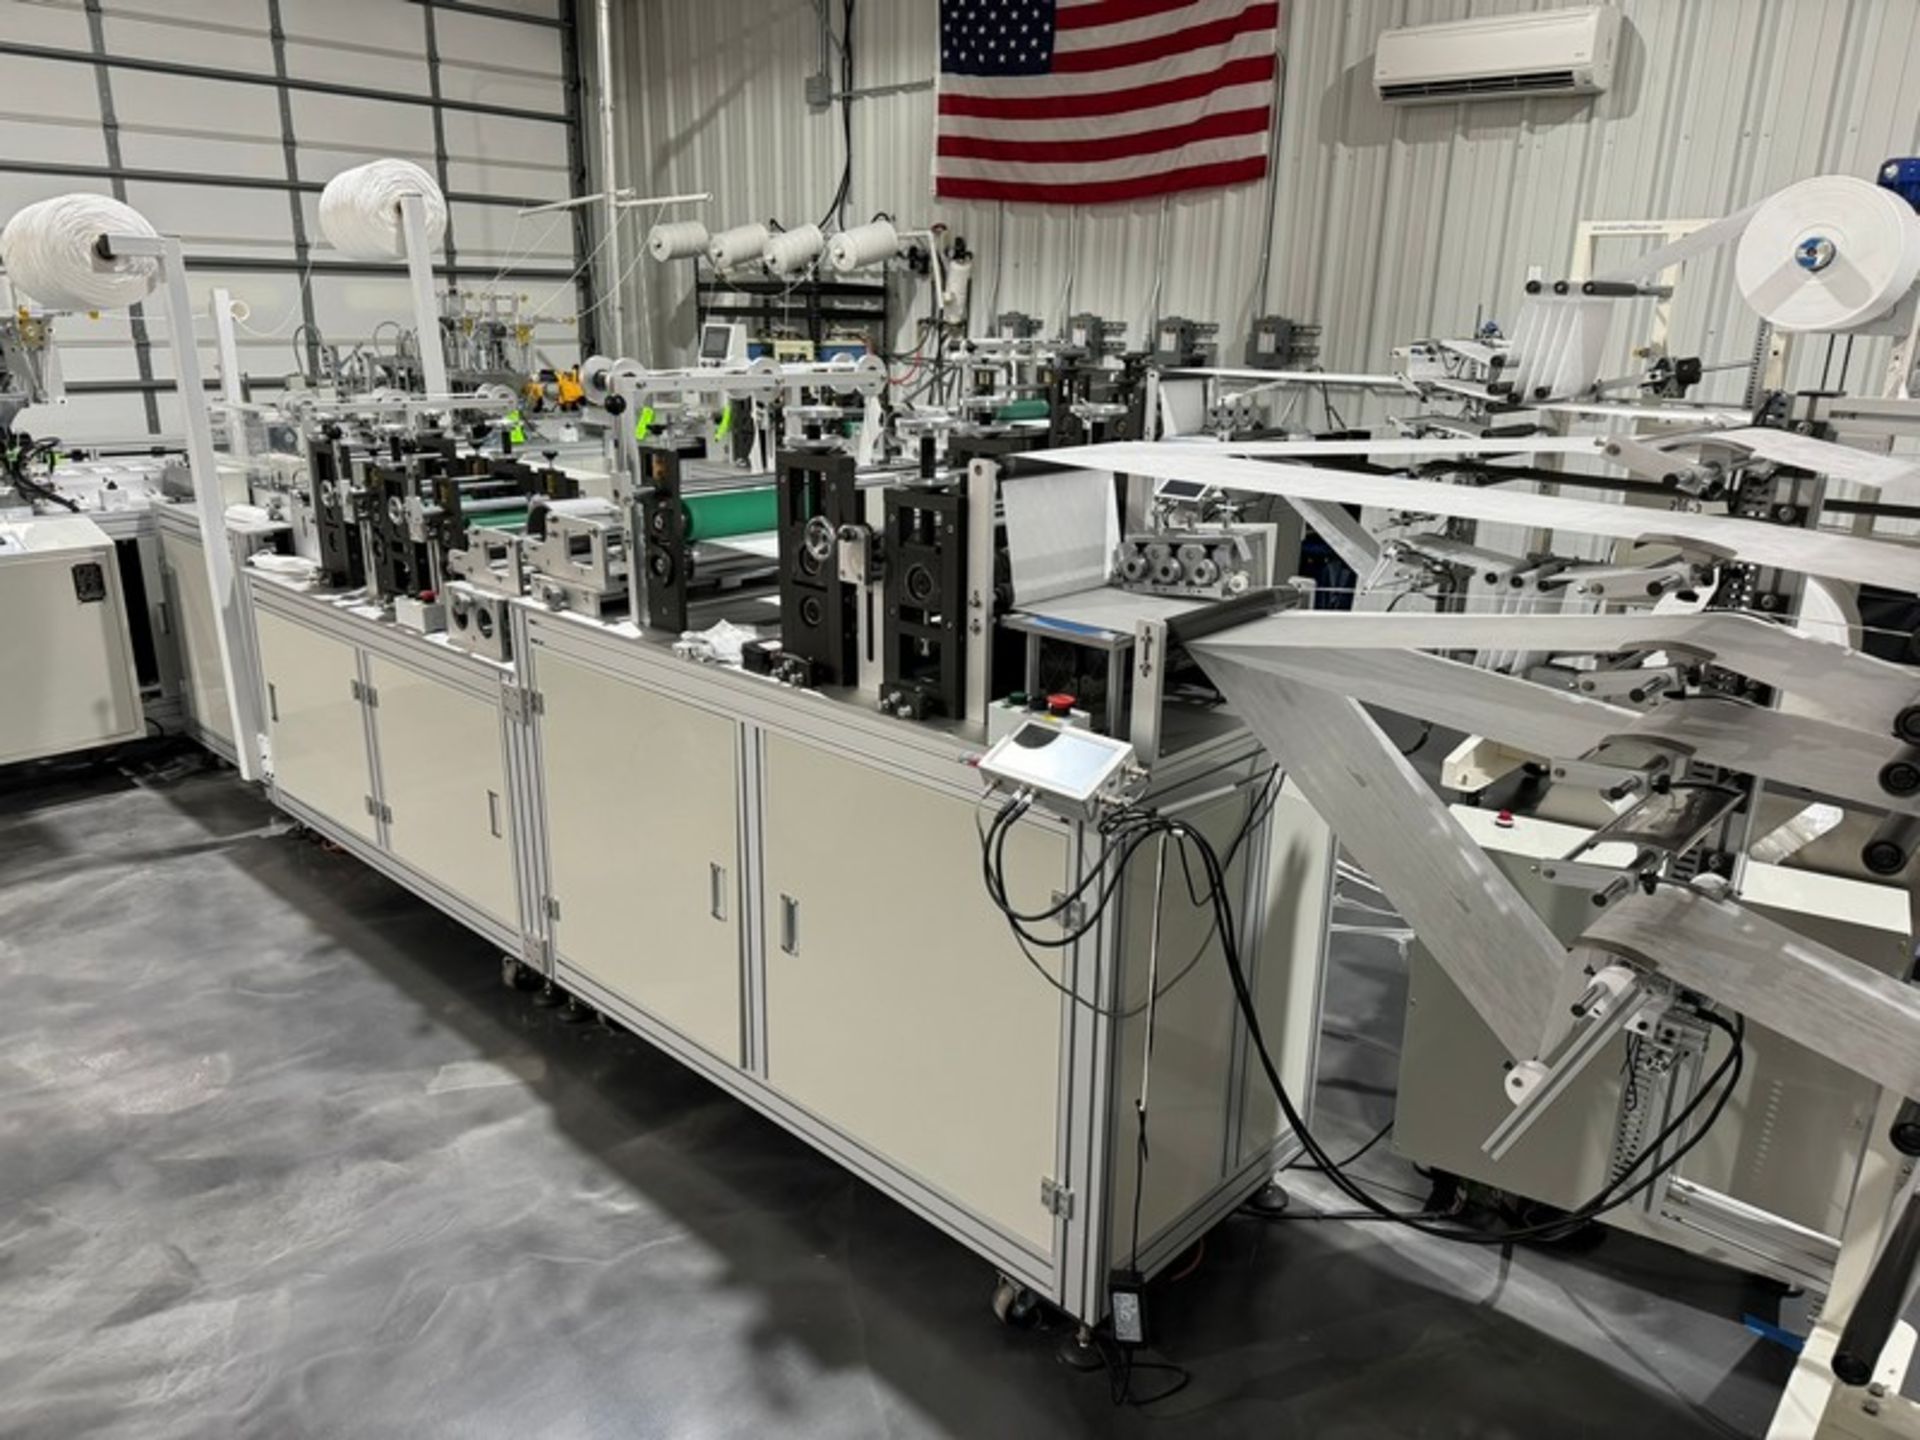 2022 KYD Automatic 6,000 Units Per Hour Mask Manufacturing Line, Includes Unwinding Station, Rolling - Image 21 of 30